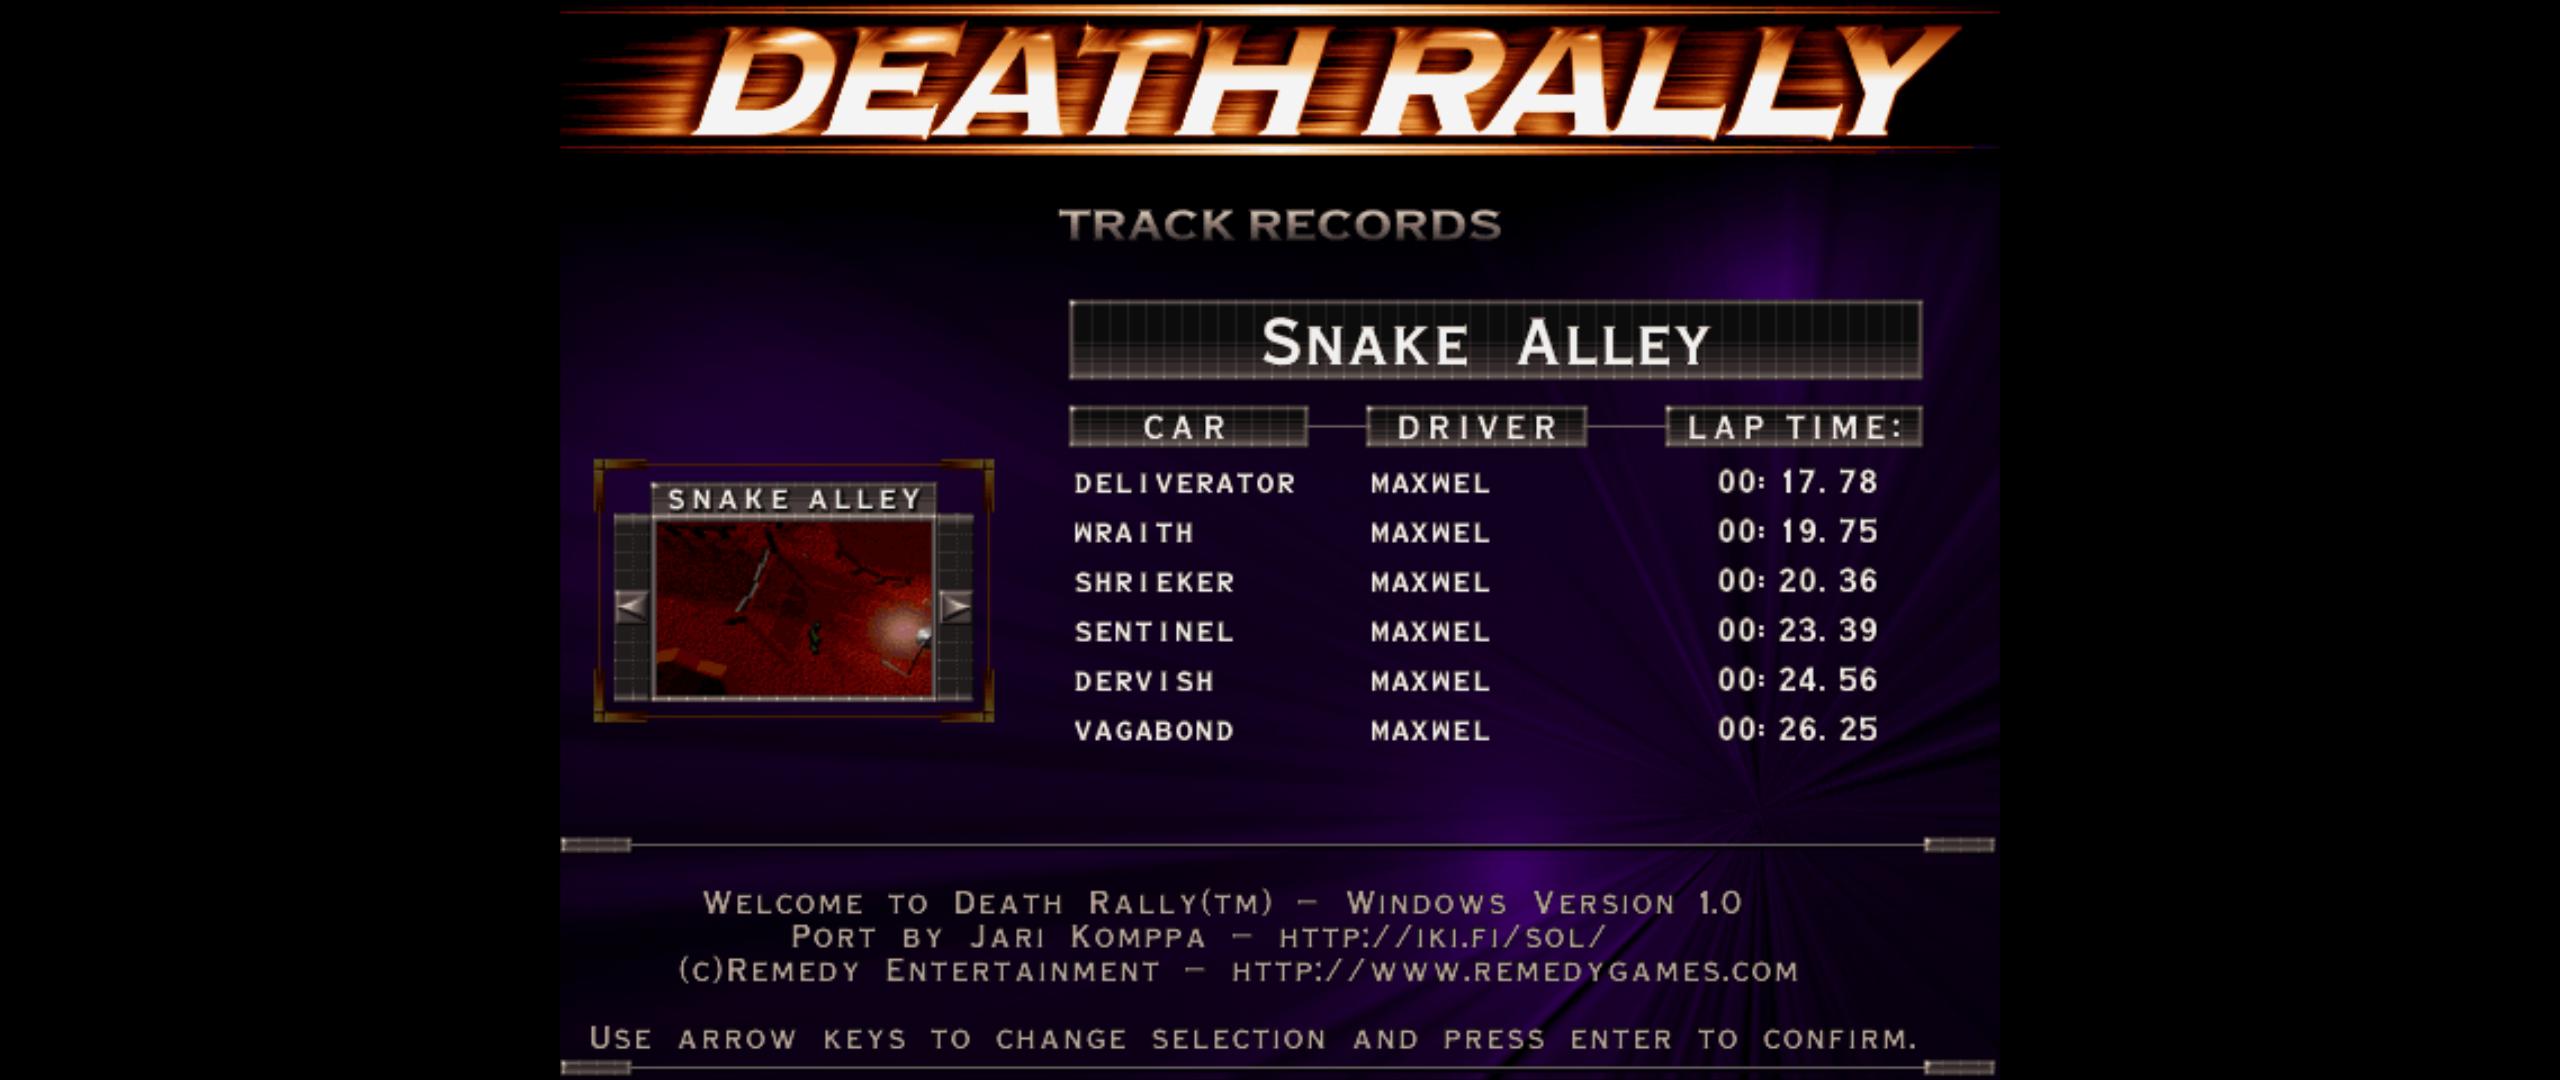 Maxwel: Death Rally [Snake Alley, Deliverator Car] (PC) 0:00:17.78 points on 2016-03-03 02:09:58